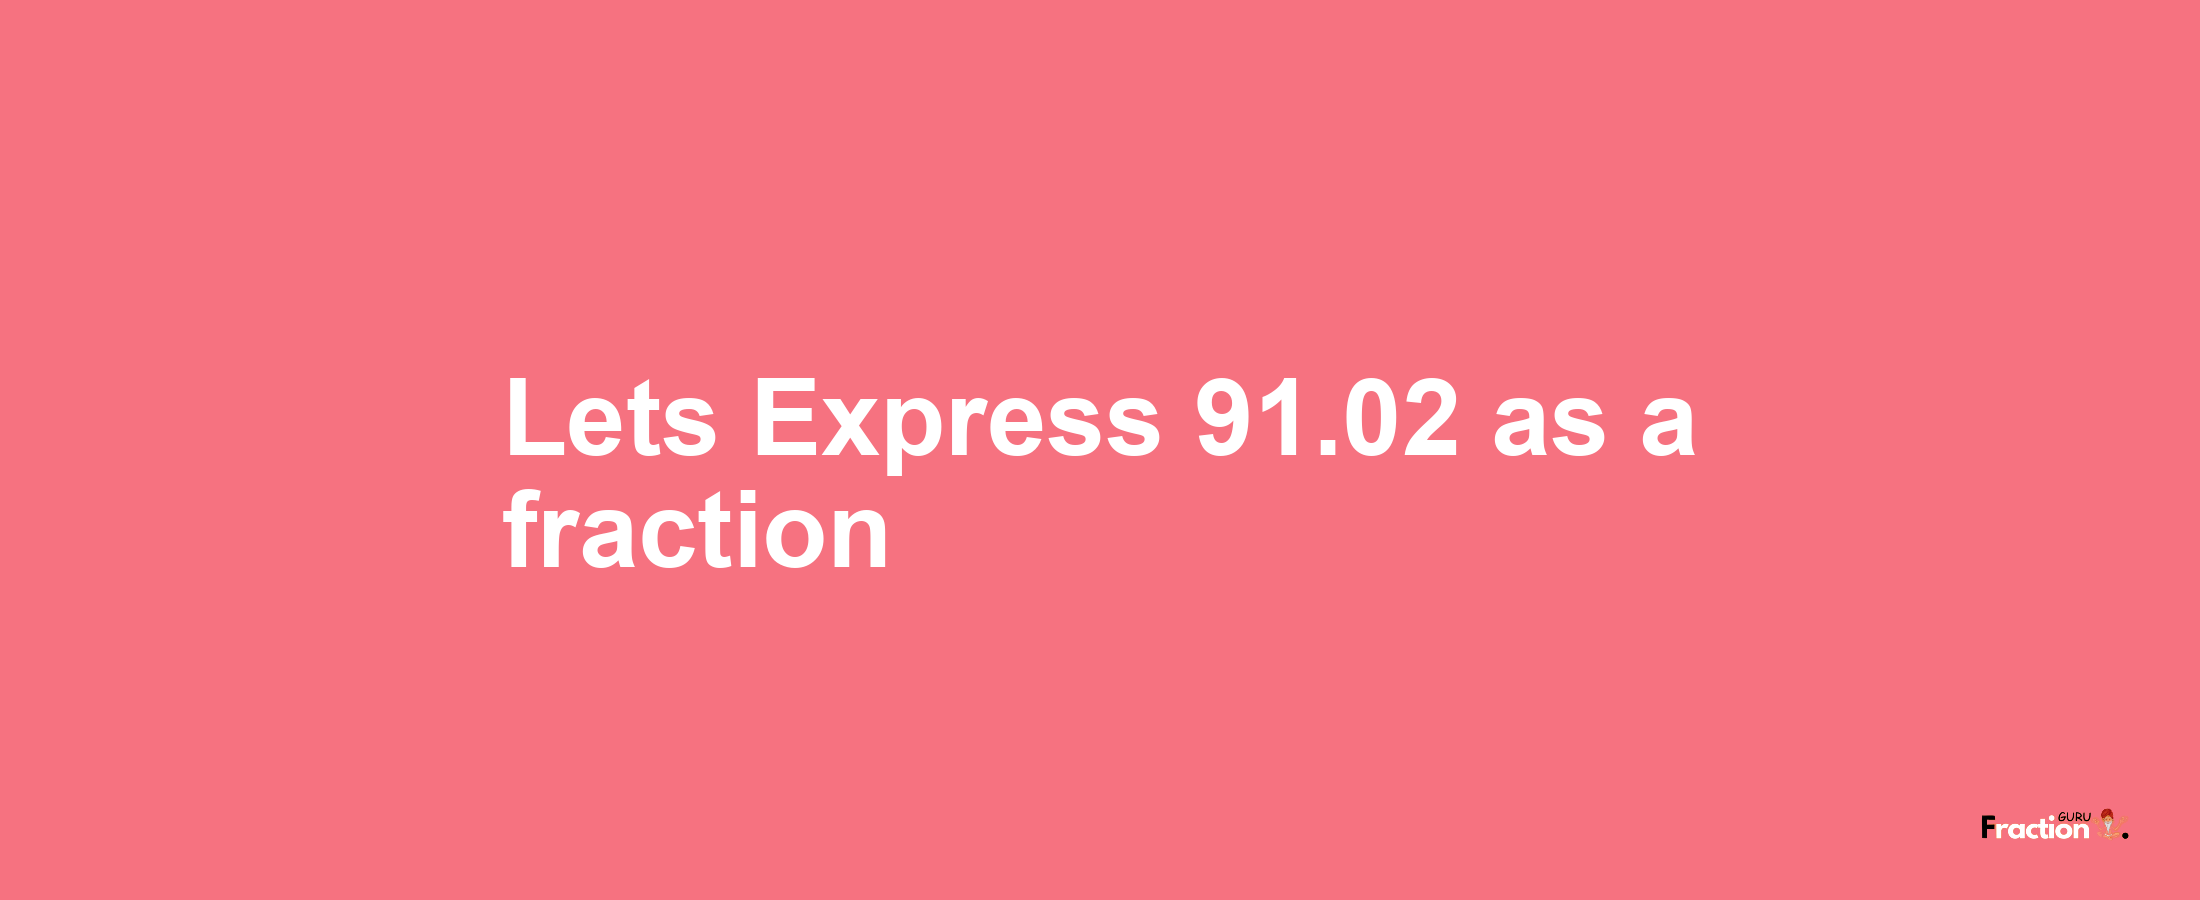 Lets Express 91.02 as afraction